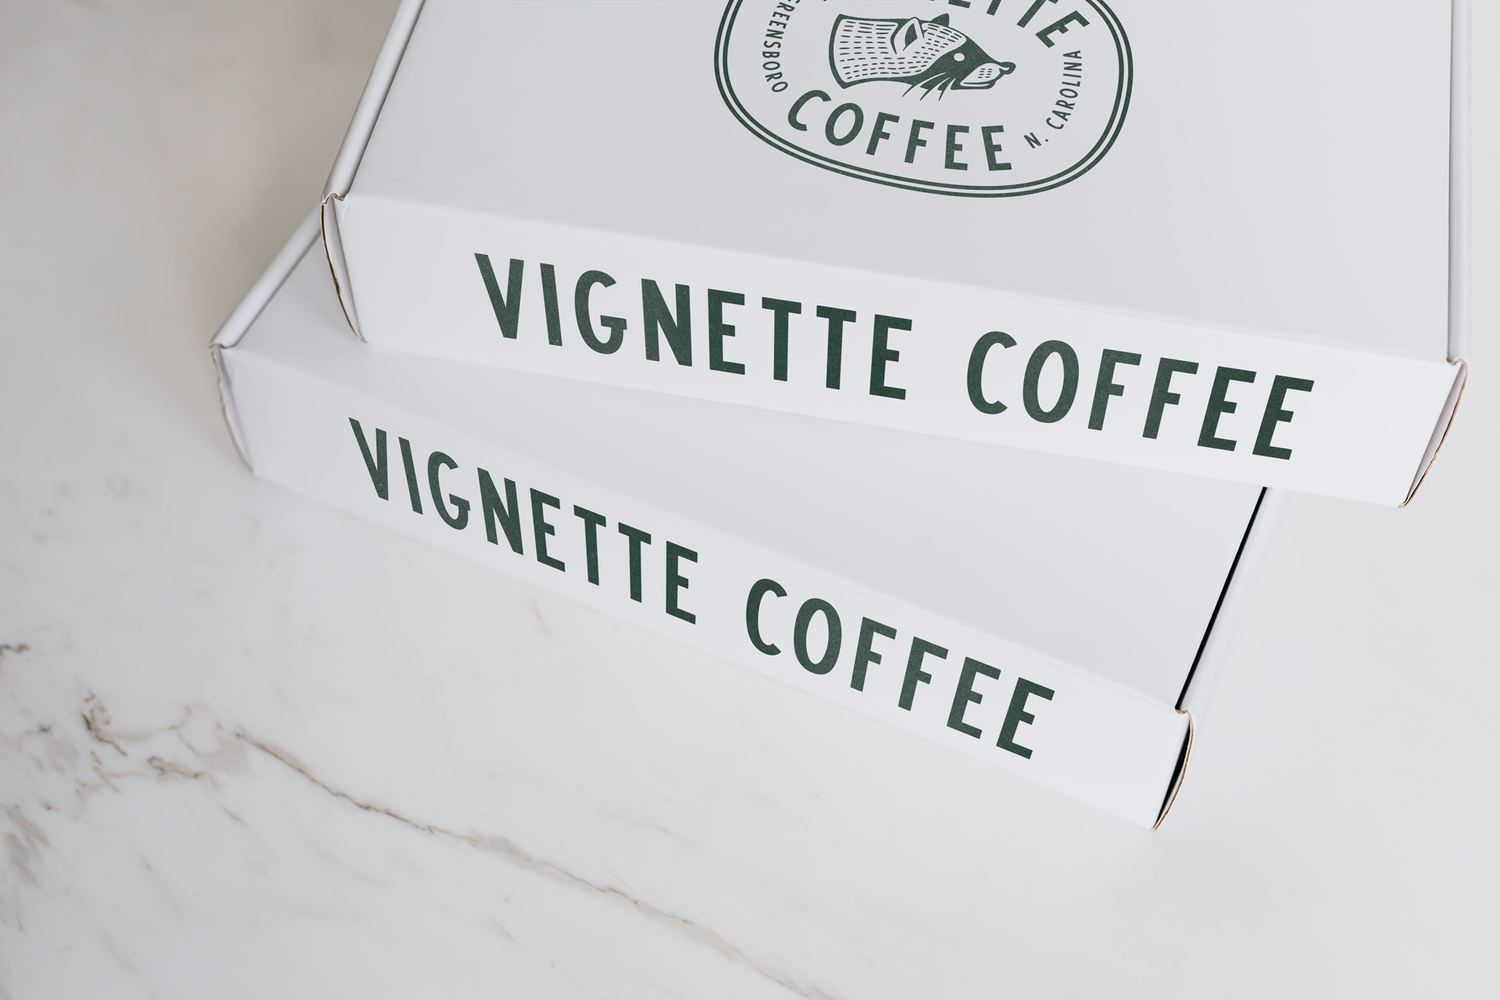 White Boxes featuring Vignette Coffee written in sans serif black letterings. A raccoon logo on top.